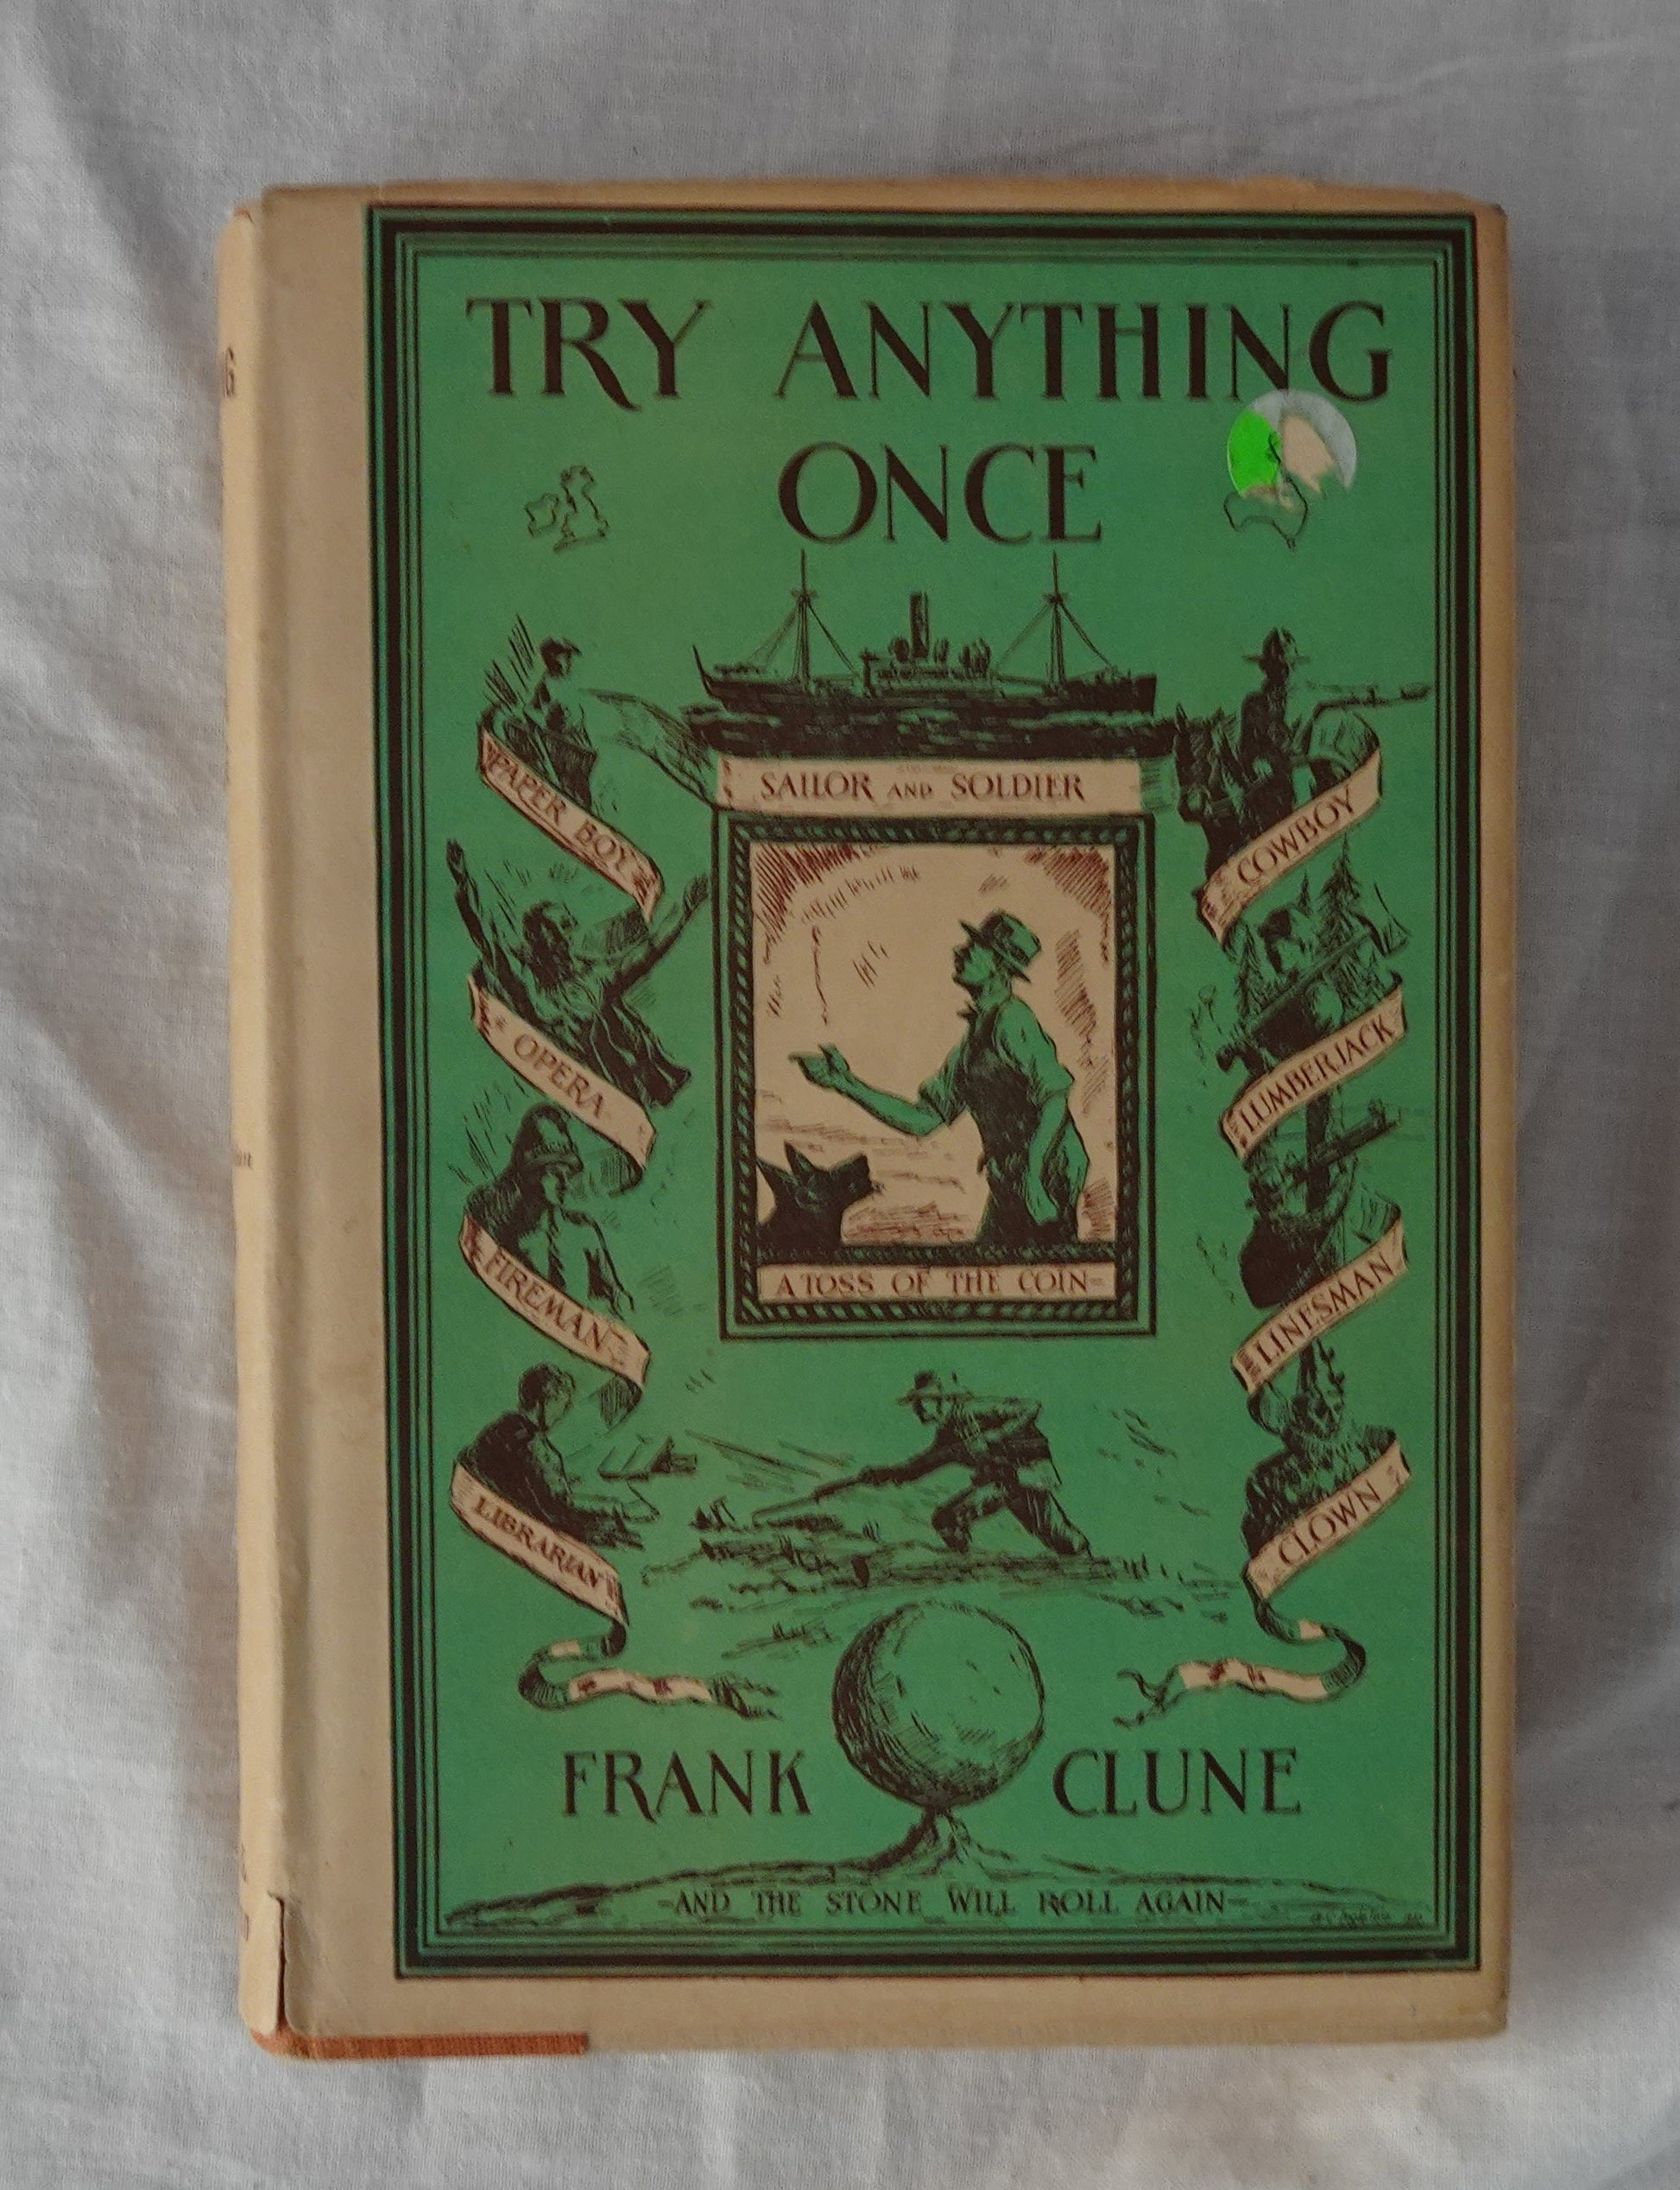 Try Anything Once  The Autobiography of a Wanderer  by Frank Clune